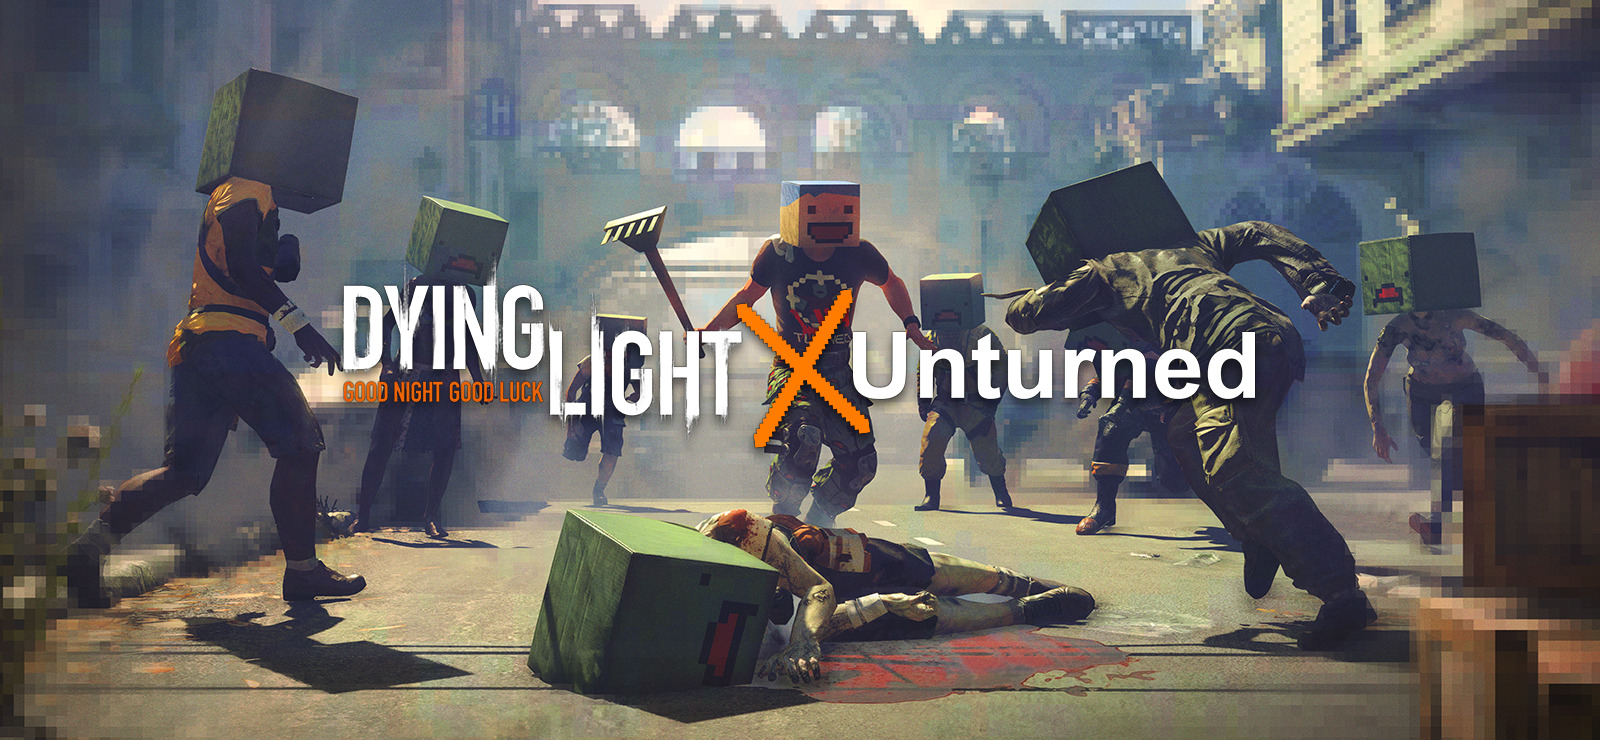 Dying Light - Unturned Pack on